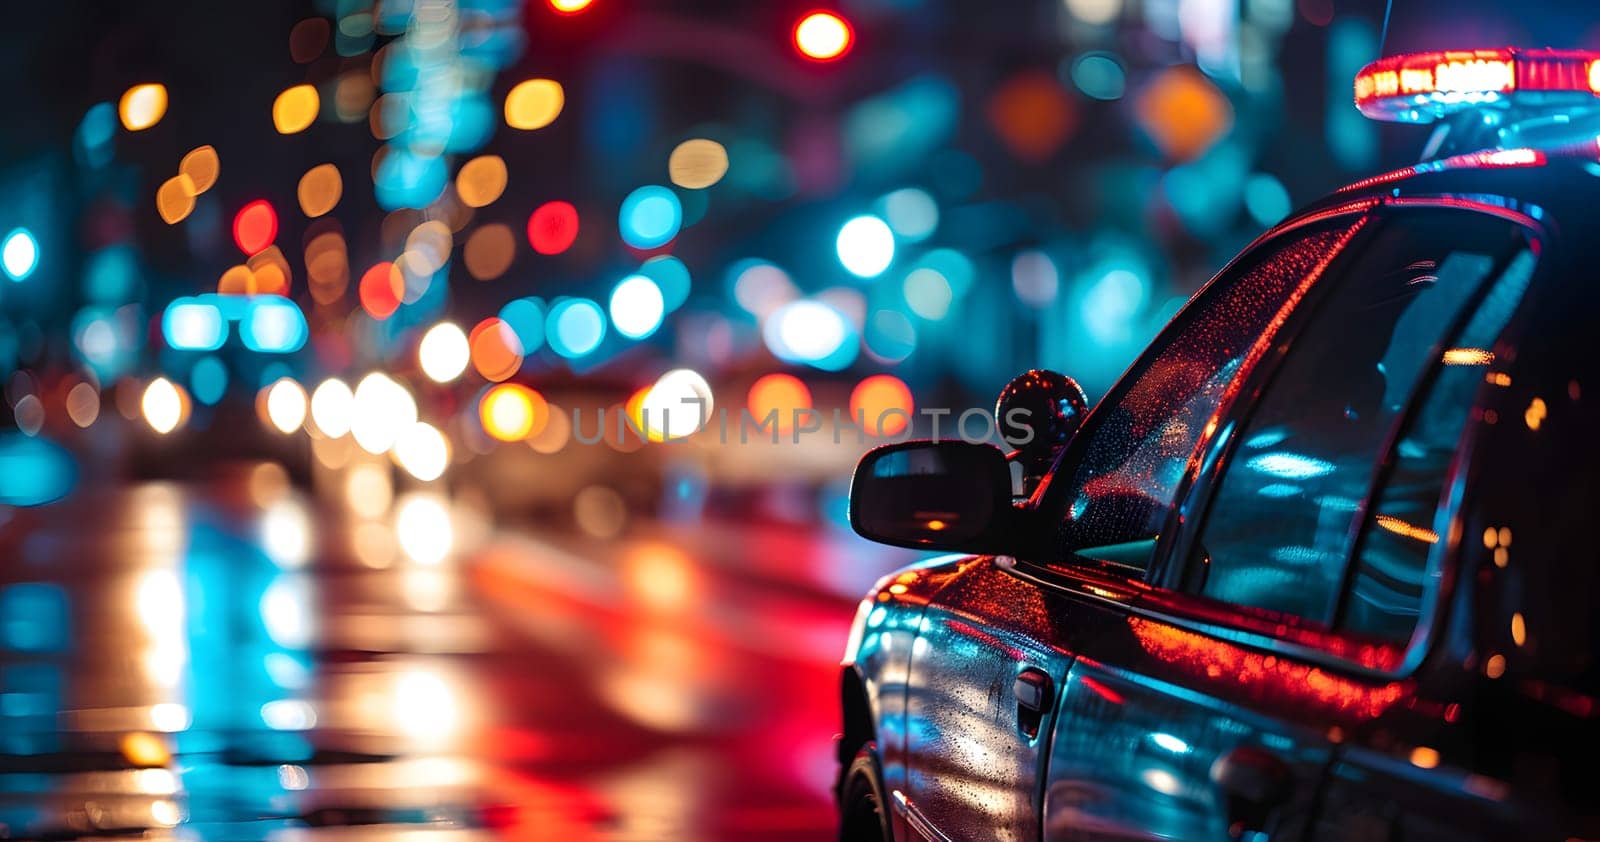 Police car lights at night in city street with selective focus and bokeh. Neural network generated image. Not based on any actual person or scene.